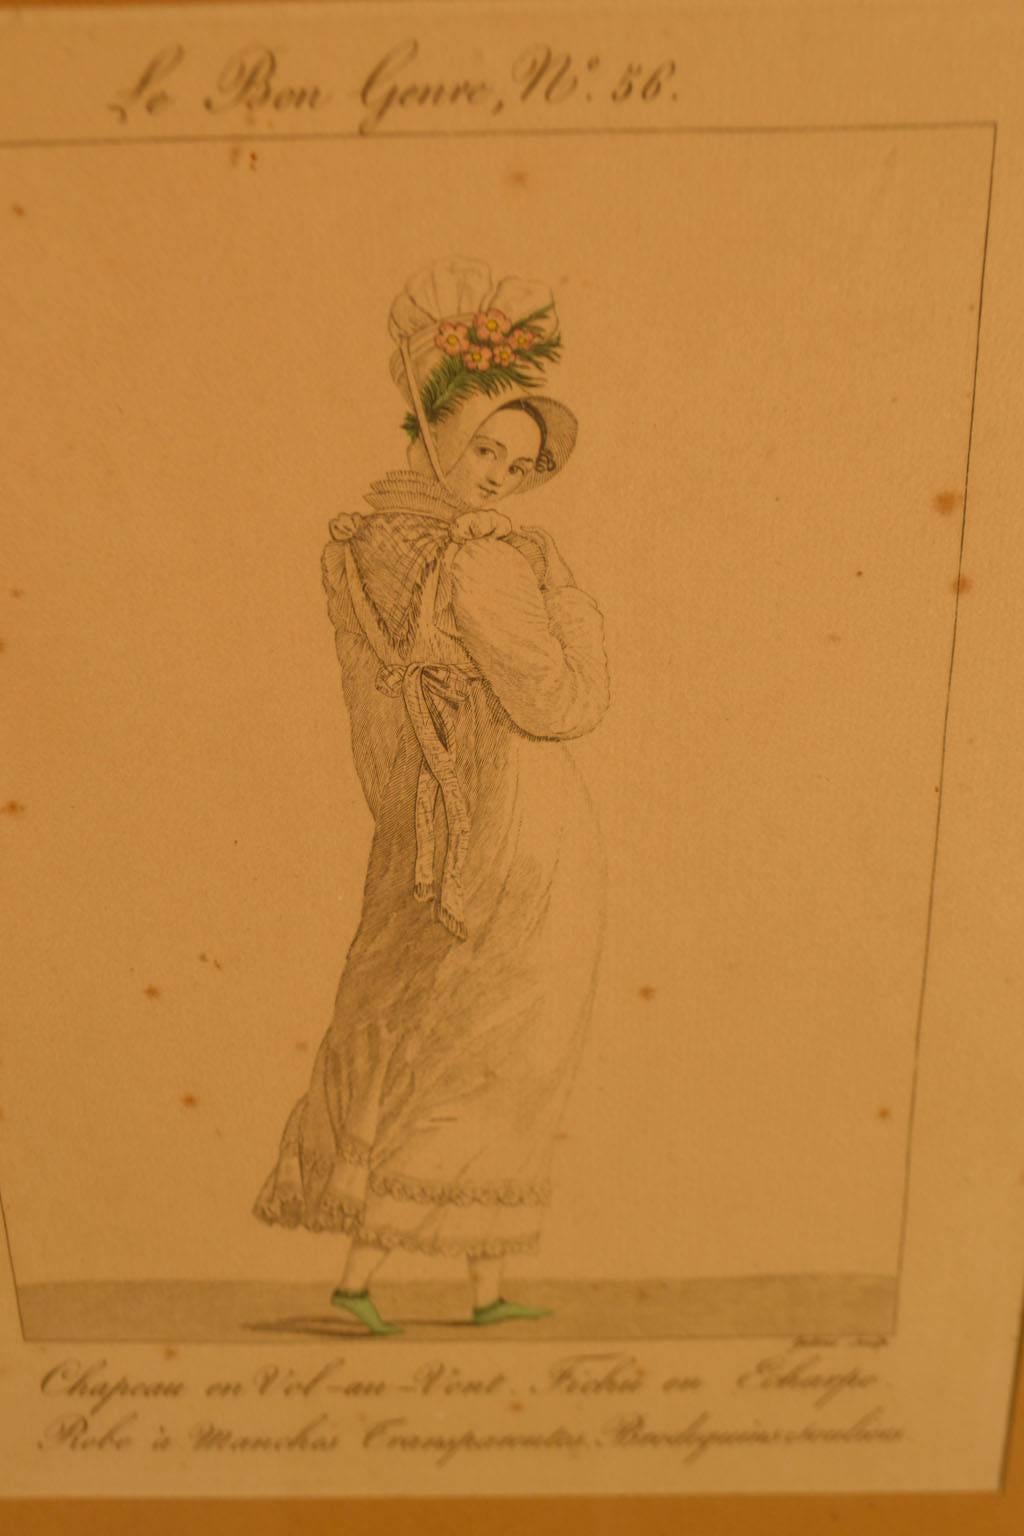 18th century gold framed fashion engraving of a woman in a dress and bonnet and sea green shoes. Some pitting to the engraving.